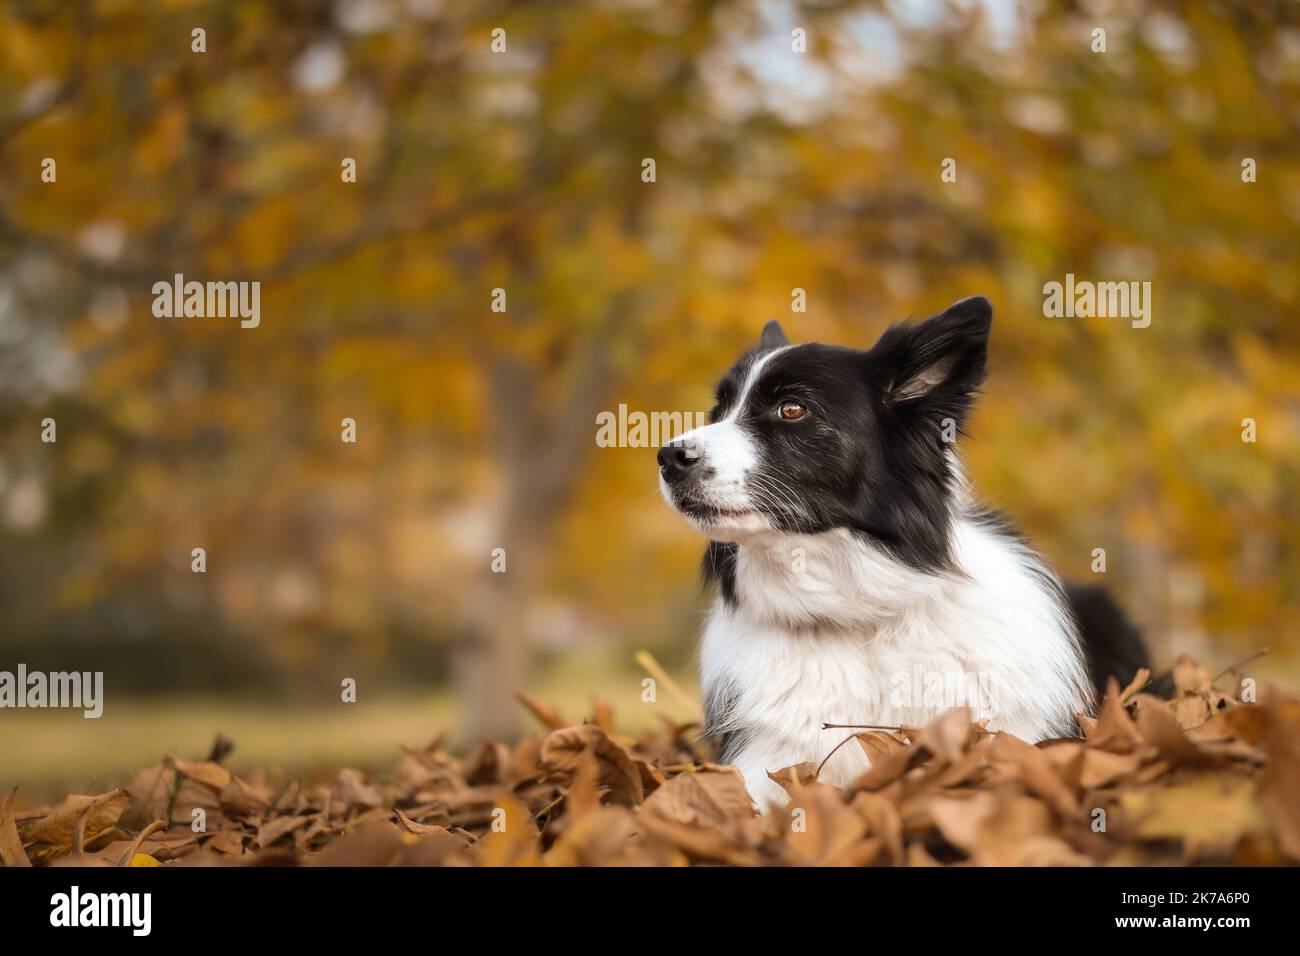 Sweet Border Collie Lies Down in Fallen Leaves in the Park. Shallow Depth of Field of Cute Black and White Dog in Autumn Nature in October. Stock Photo